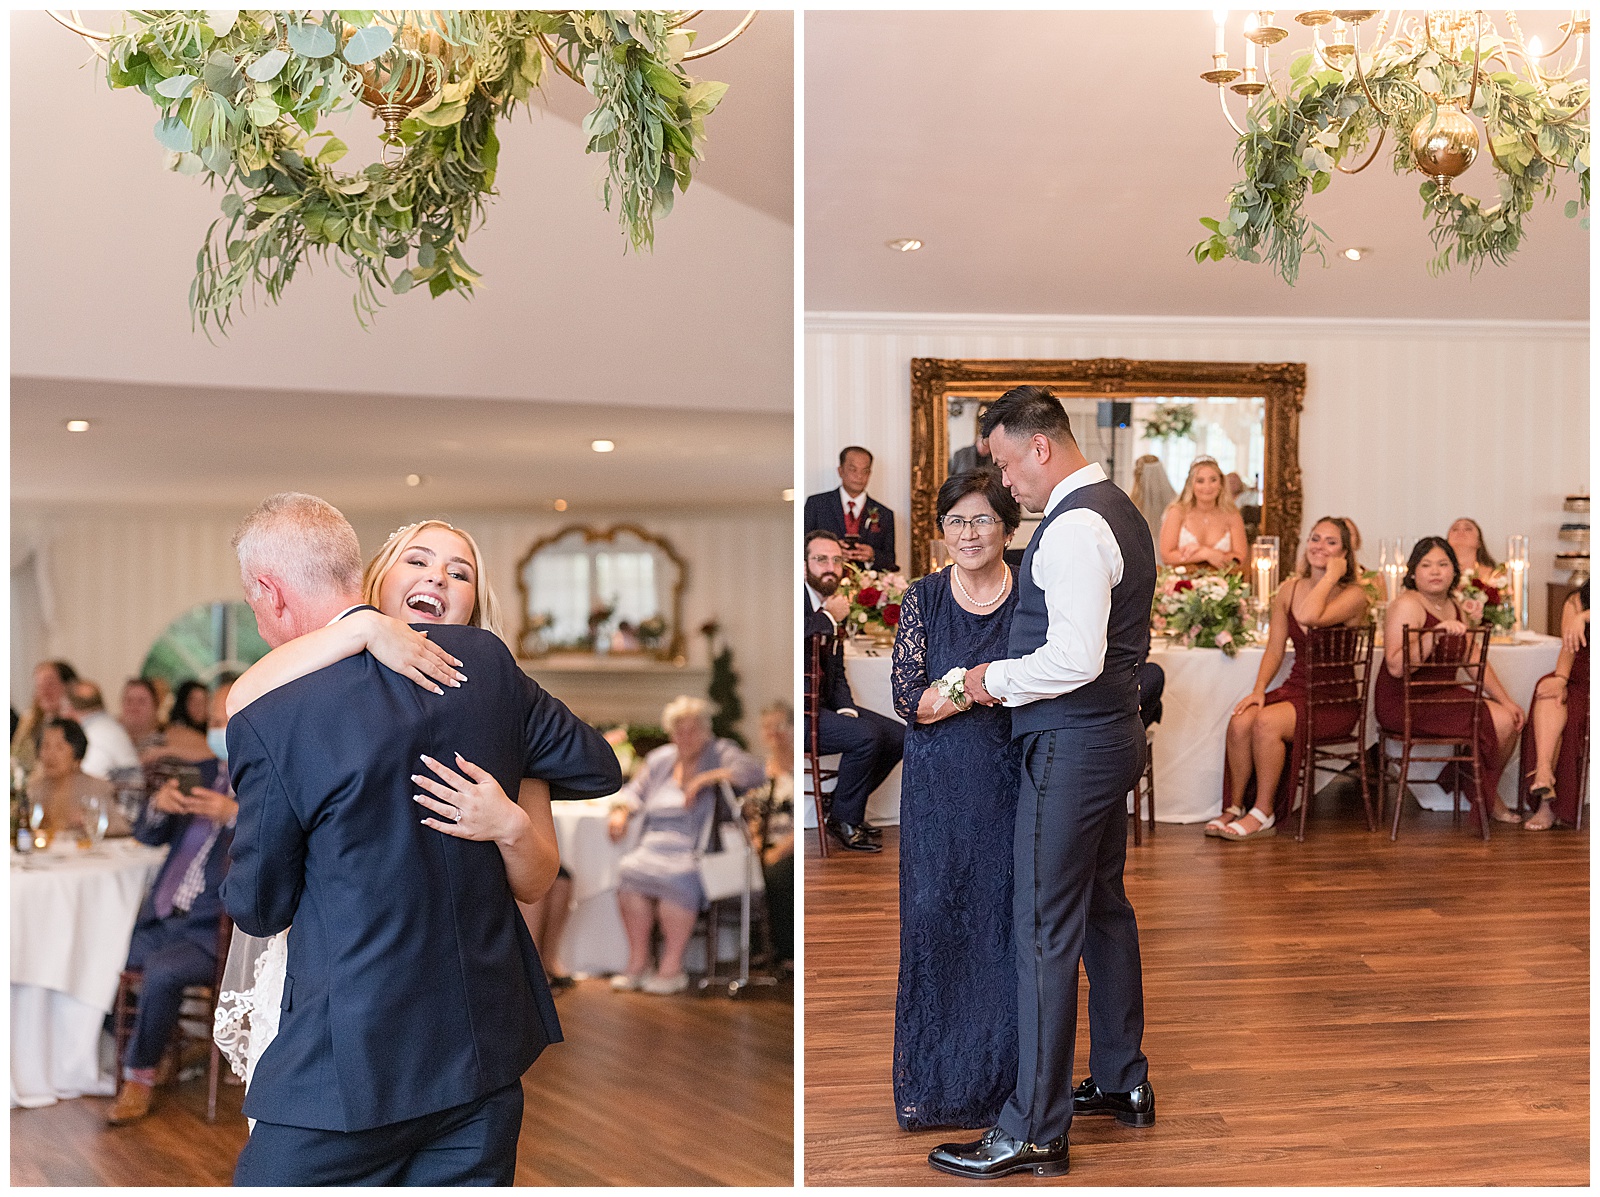 bride dances with her father and groom dances with his mother during wedding indoor wedding reception